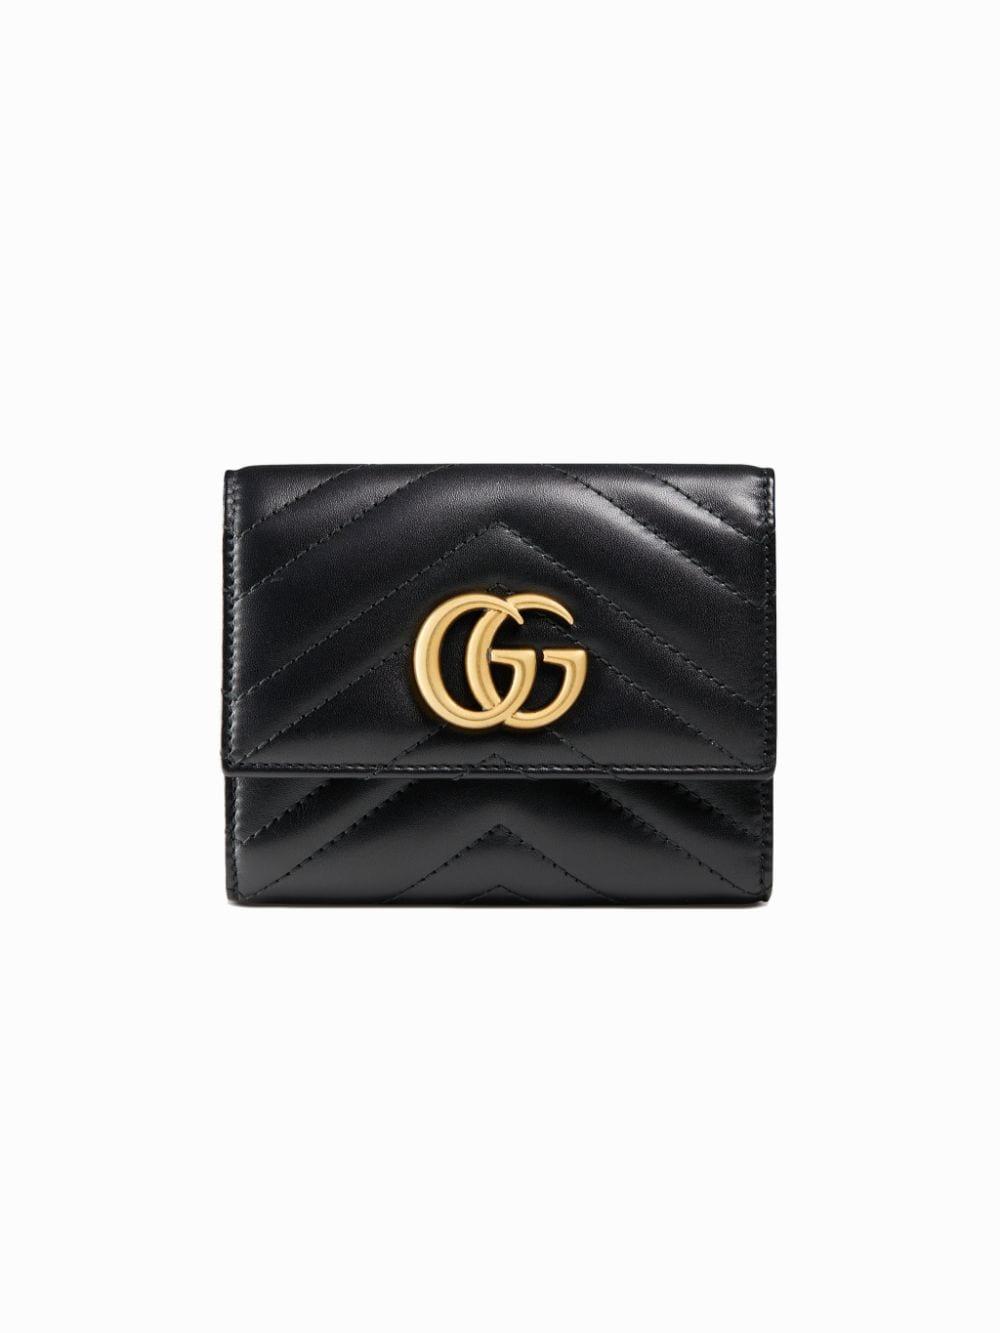 gucci wallet gg marmont